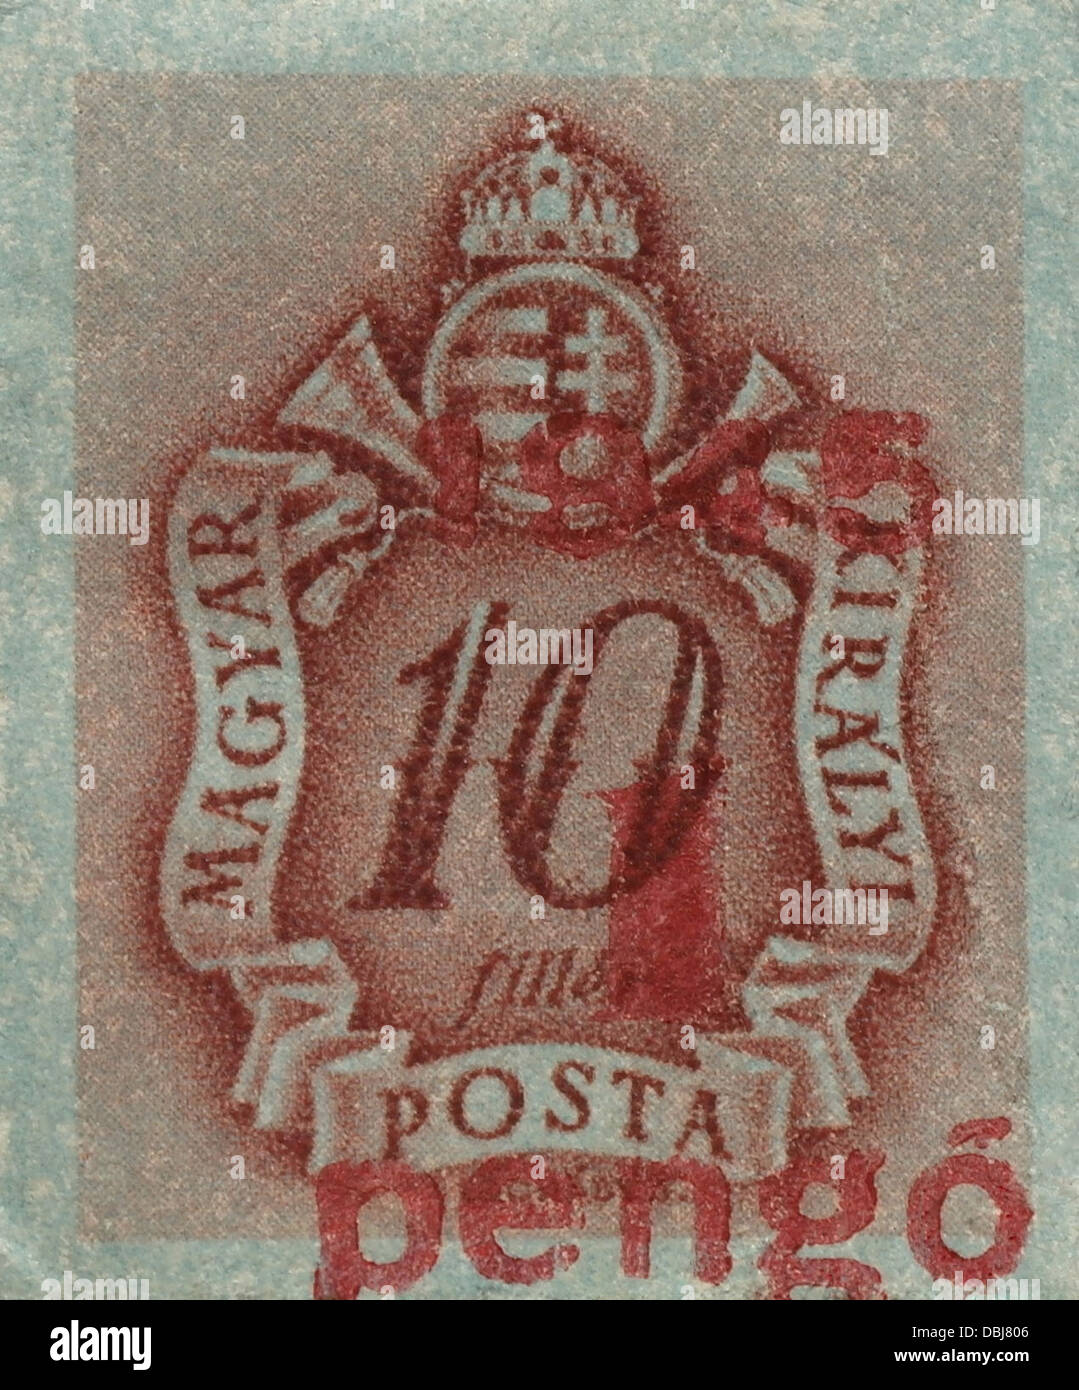 Blue red 1 pengo overprint 10 filler Coat of Arms Hungary post-horn stamp, 'Postage Due Series', issued Budapest, June 1945 Stock Photo